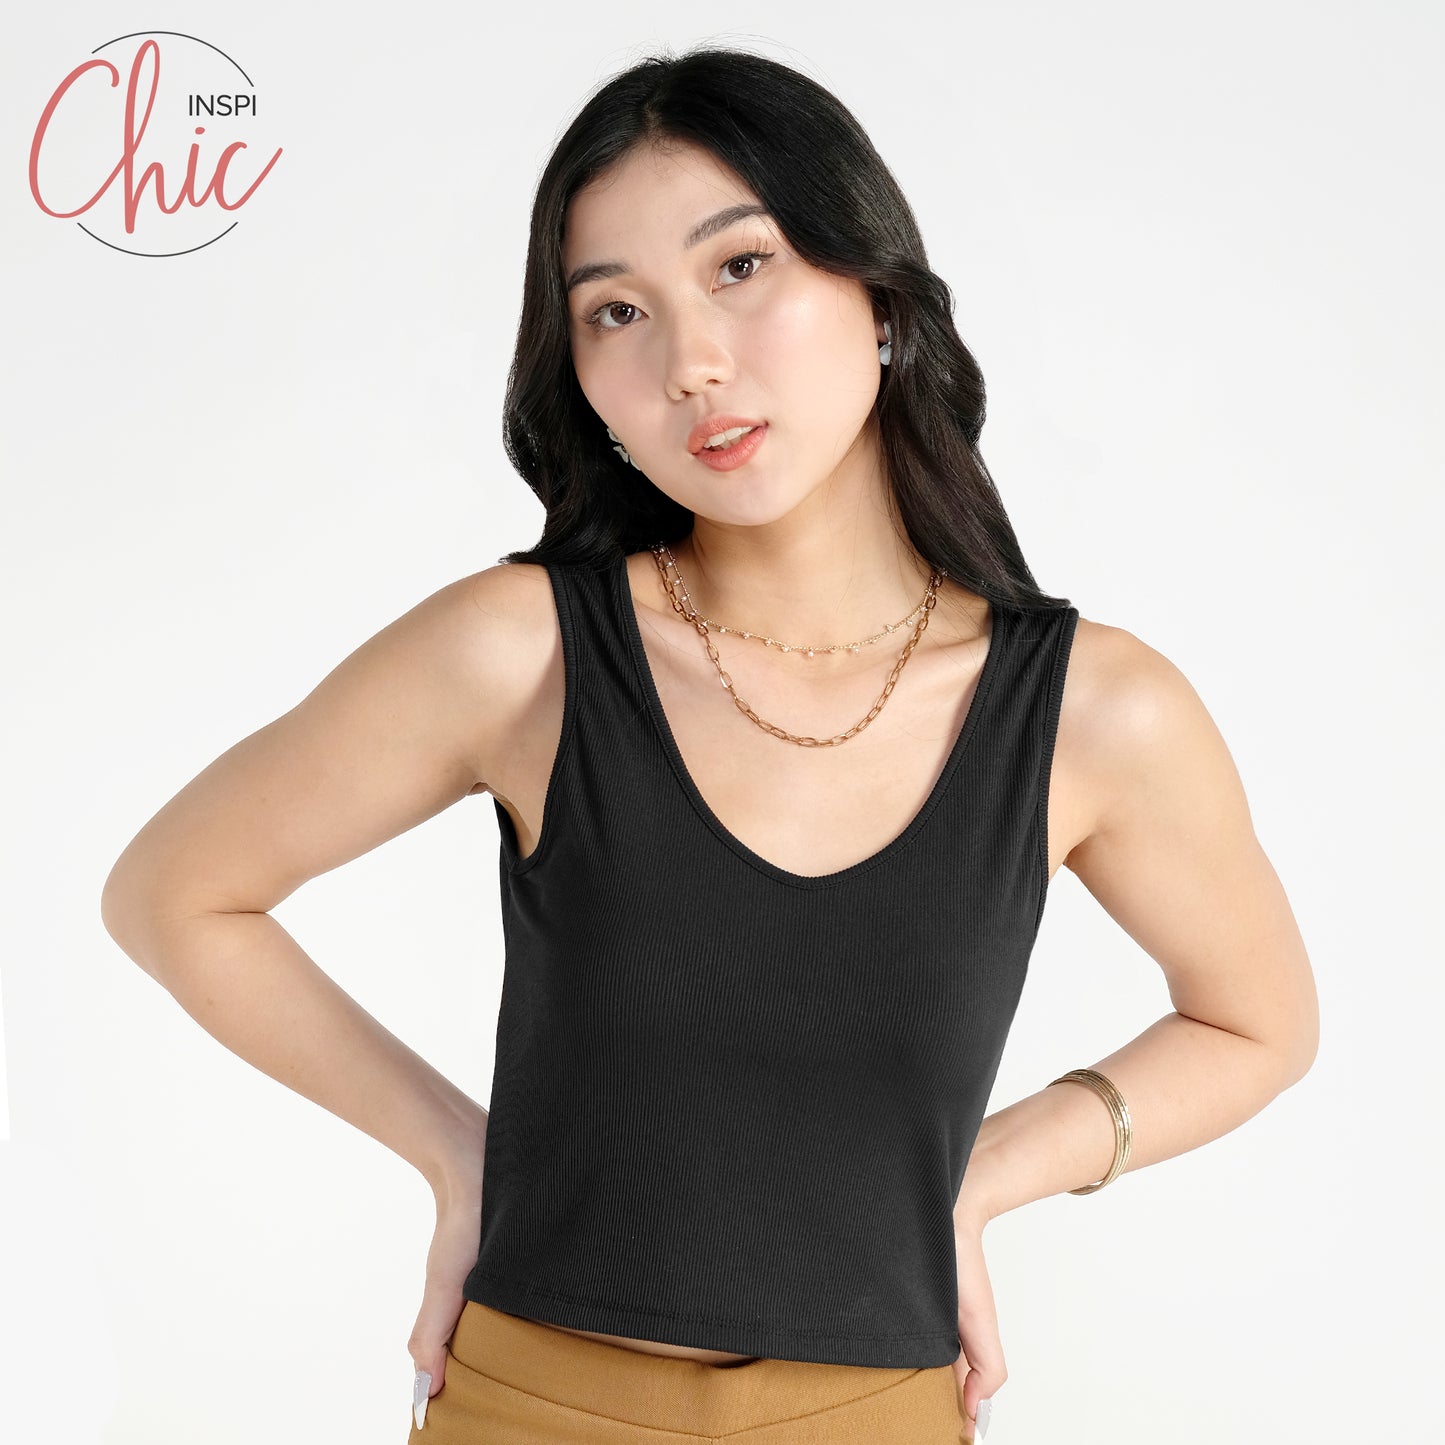 INSPI Chic Ribbed Trendy Curve Halter Top Trendy Top Shirt Sleeveless